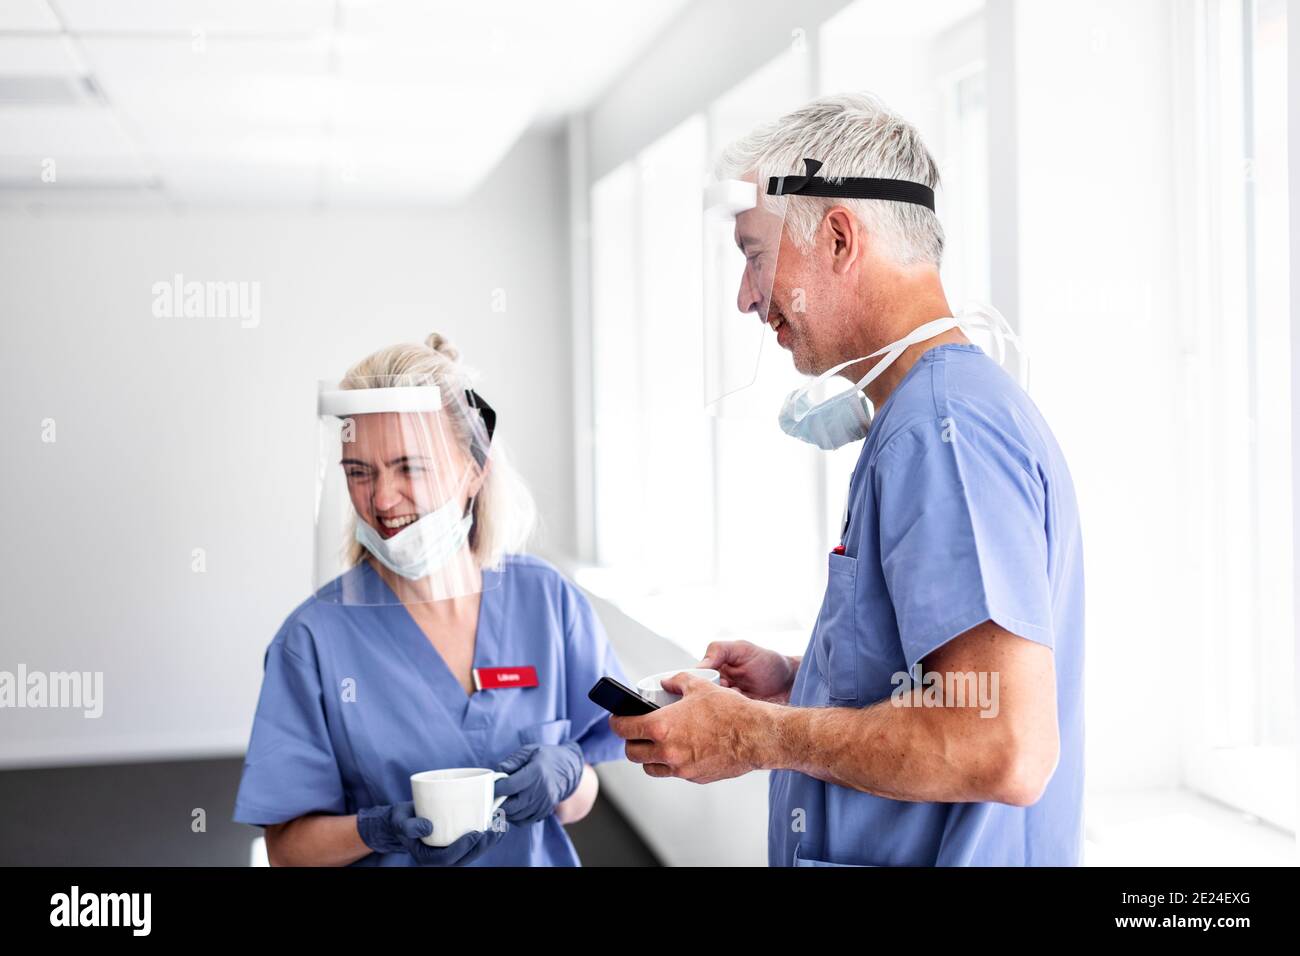 Doctors wearing personal protective equipment Stock Photo